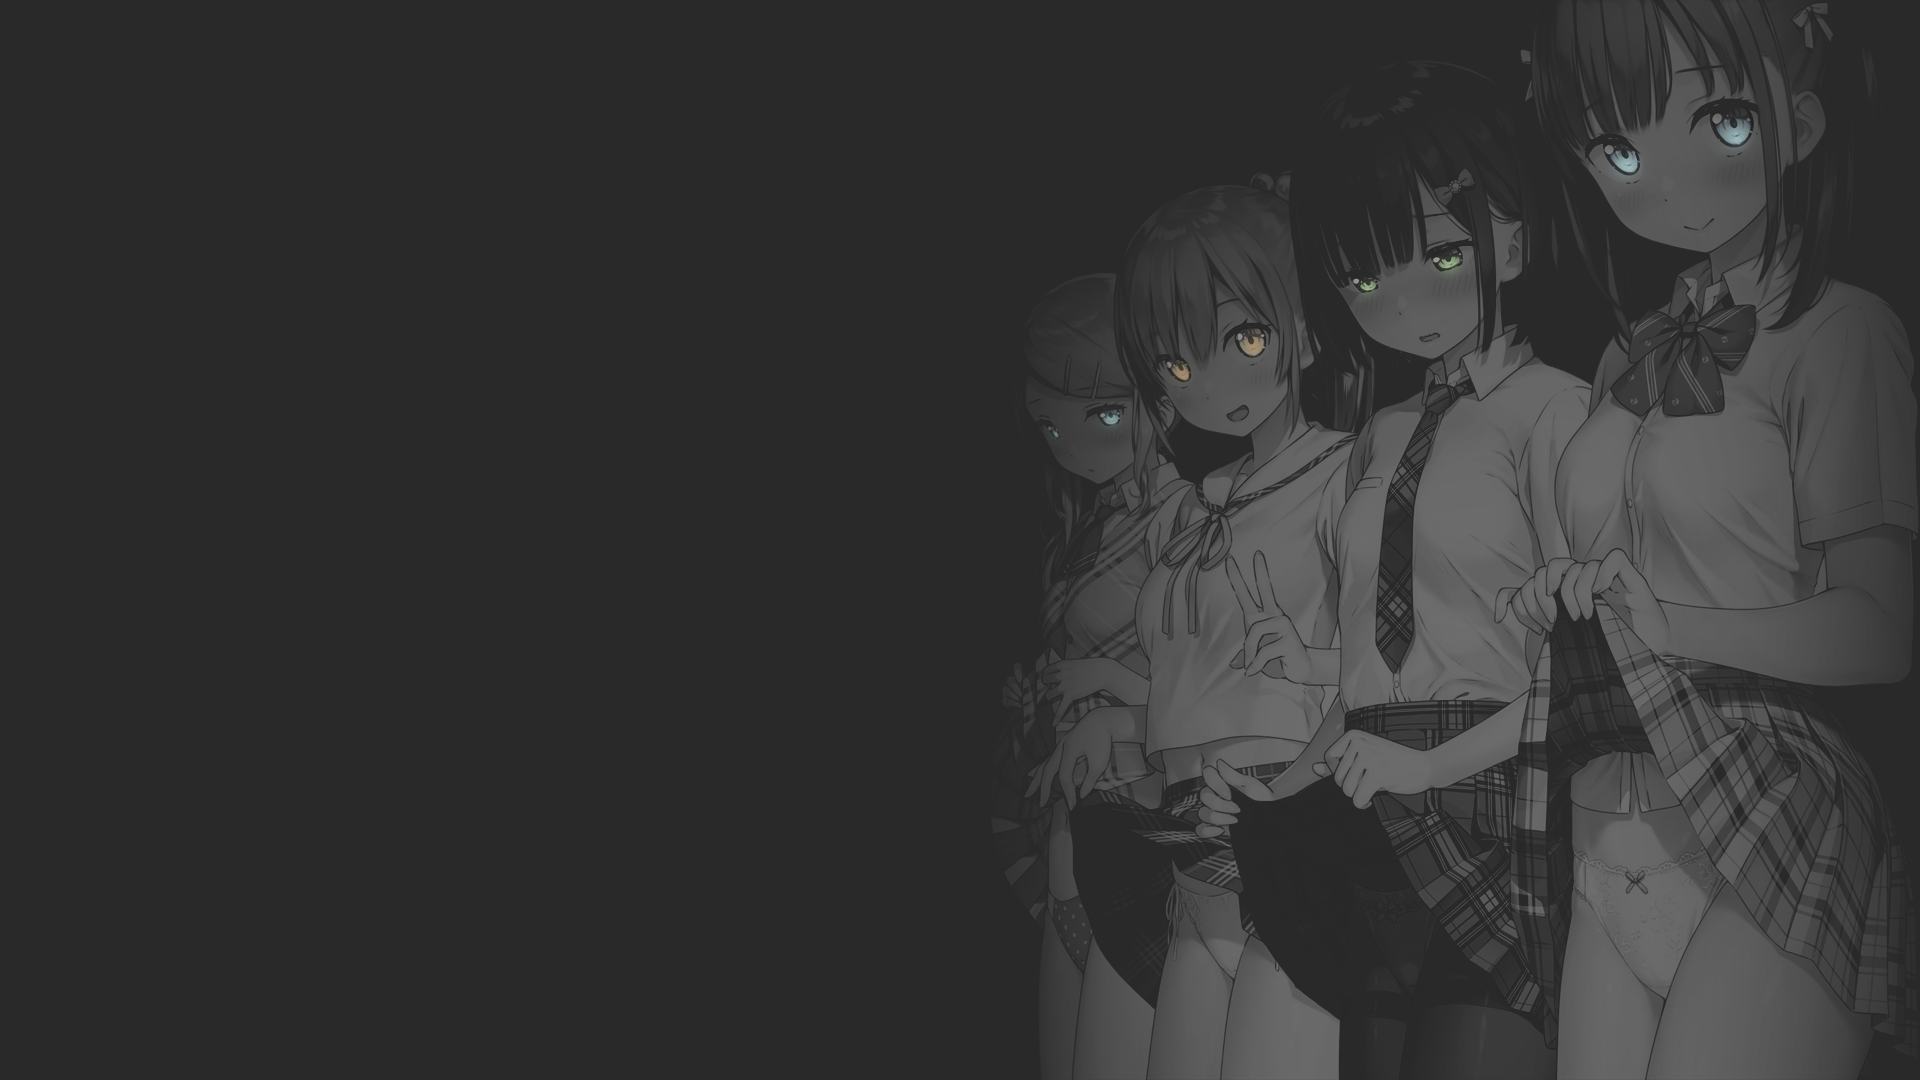 Anime 1920x1080 anime original characters anime girls illustration monochrome dark background school uniform selective coloring fan art group of women underwear panties lifting skirt tie aqua eyes green eyes yellow eyes hand gesture standing looking at viewer Kantoku Afterschool of the 5th year